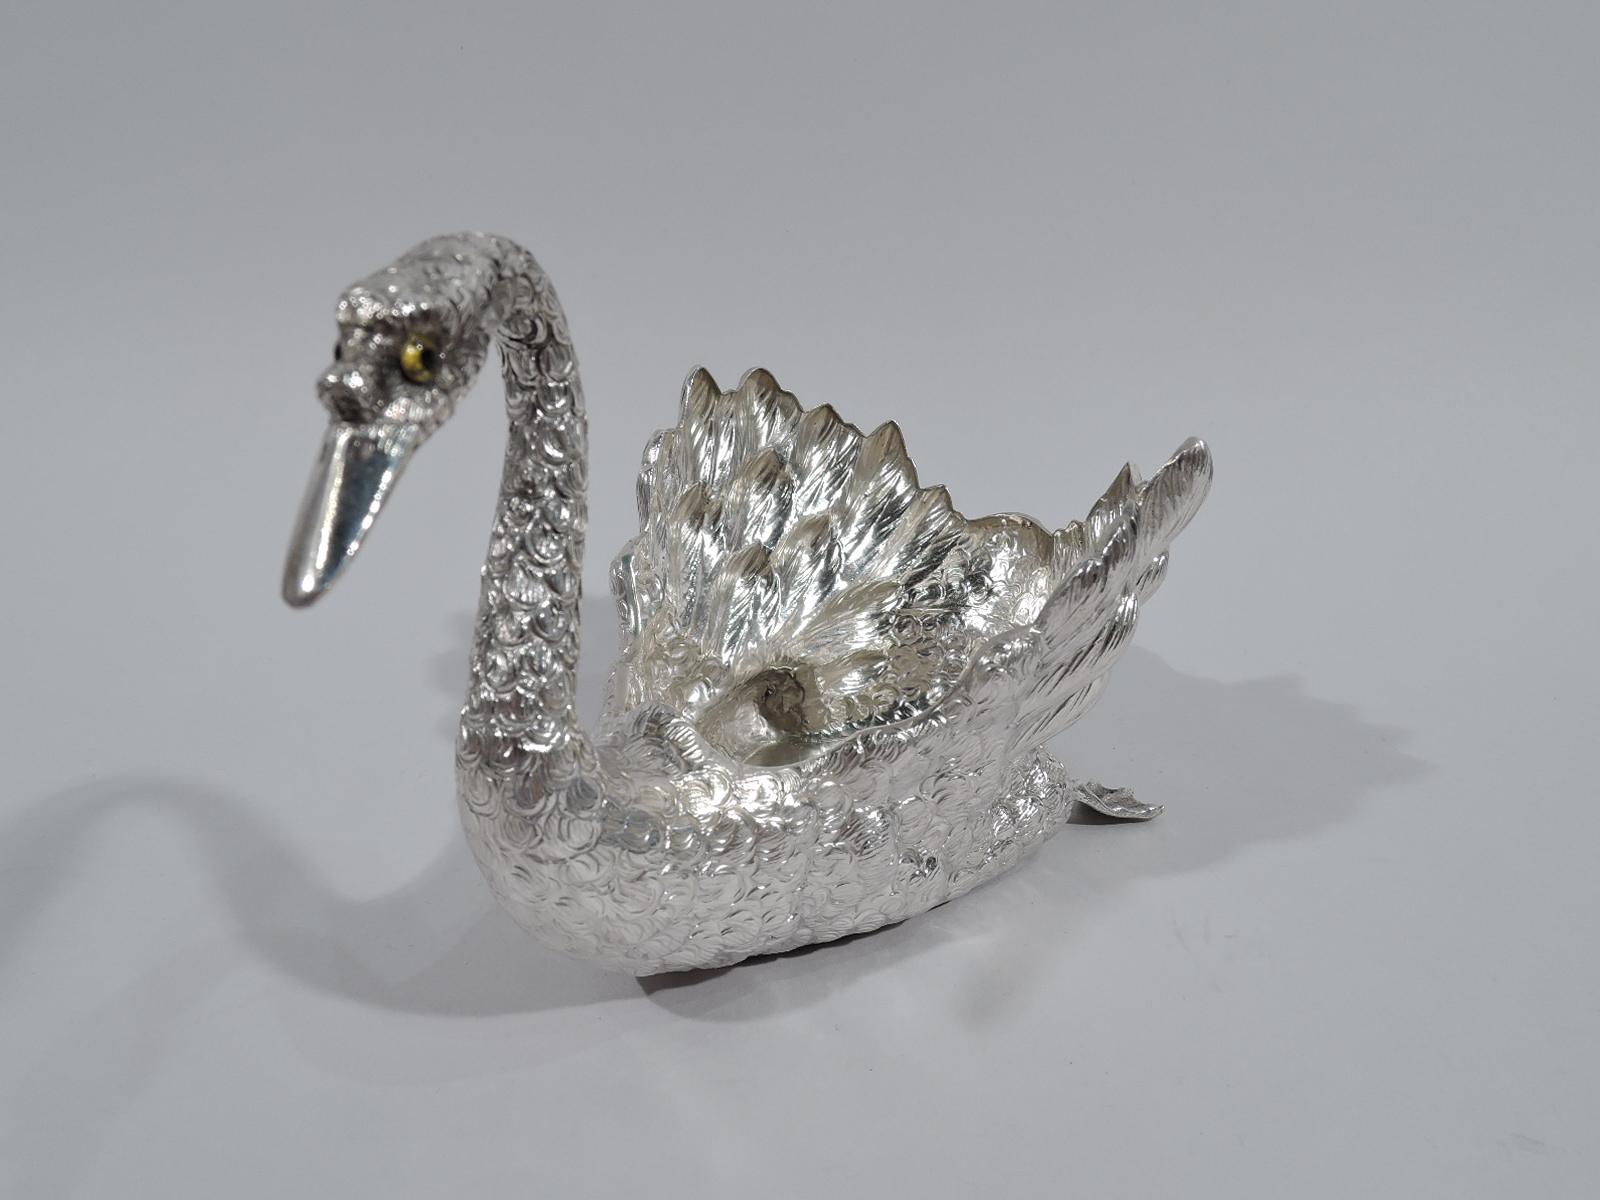 Elegant sterling silver swan. Made by Buccellati in Italy. Bird is in glide mode with flipped back paddle feet and head tilted slightly to side with intent gaze. Eyes glass. Extra fine detail in the feathers from the scaly neck to the down tail